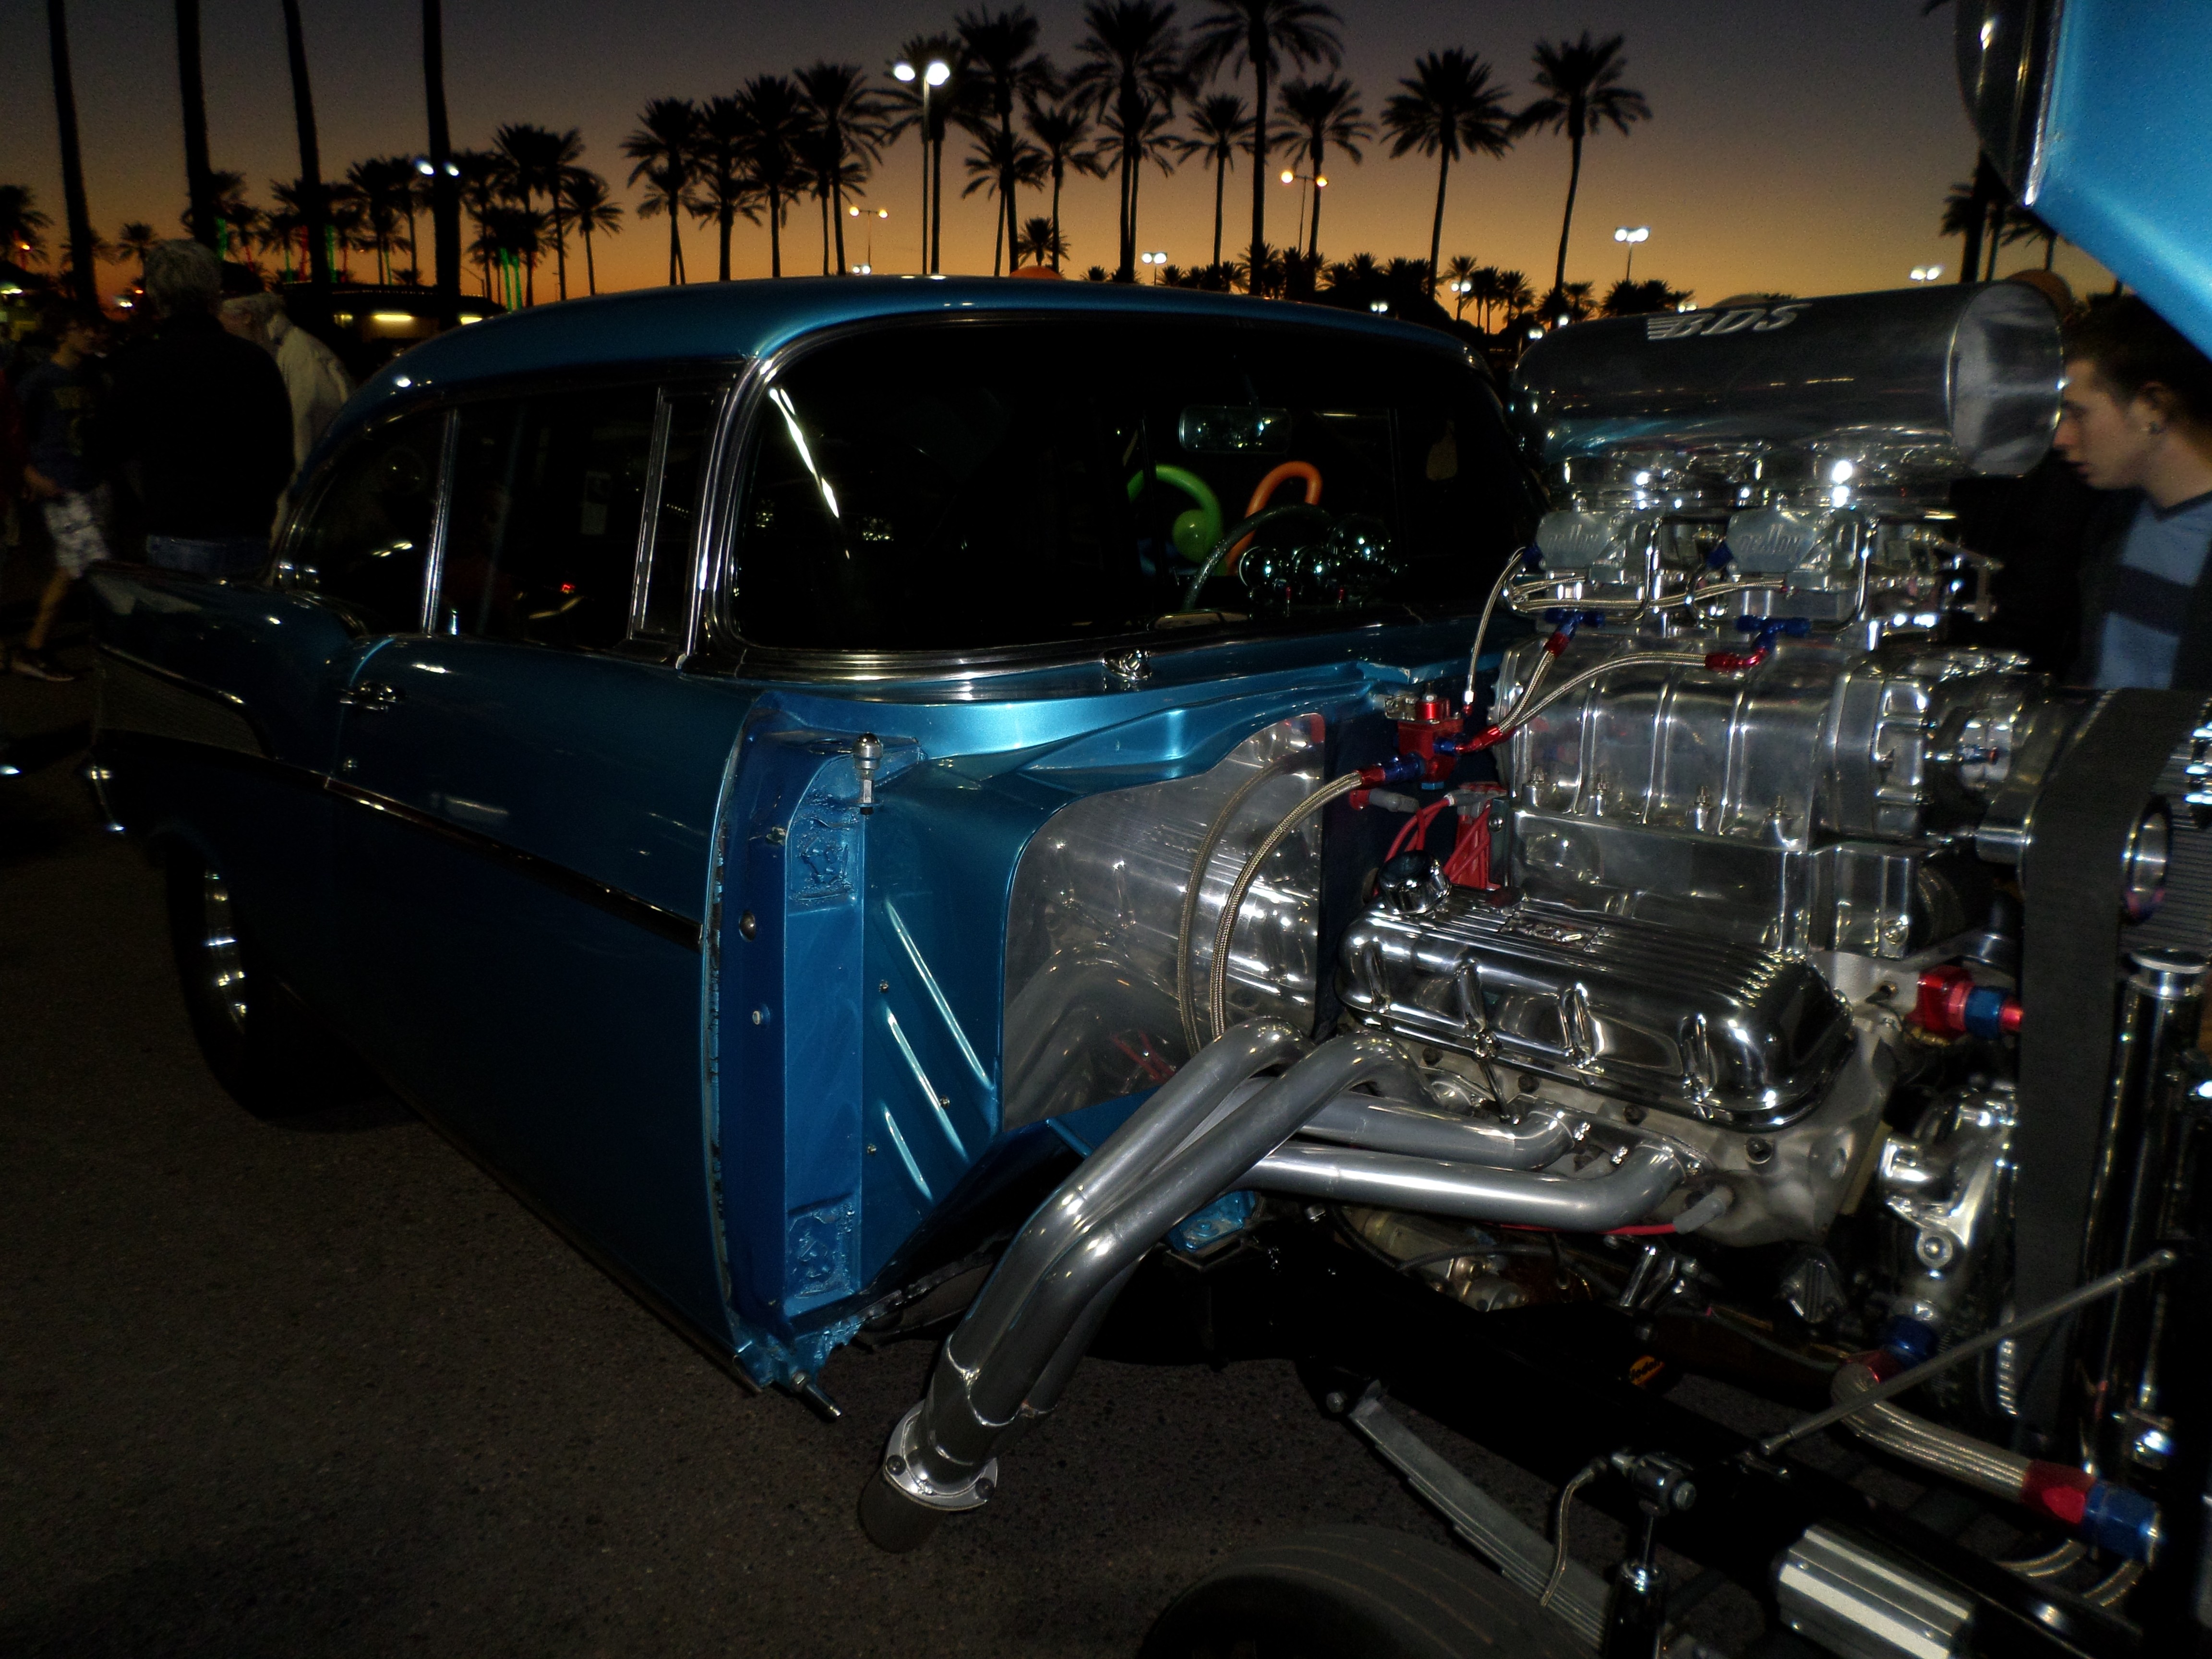 1957 Chevrolet, Bel Air, Supercharged, Muscle Cars, Old Car Wallpaper